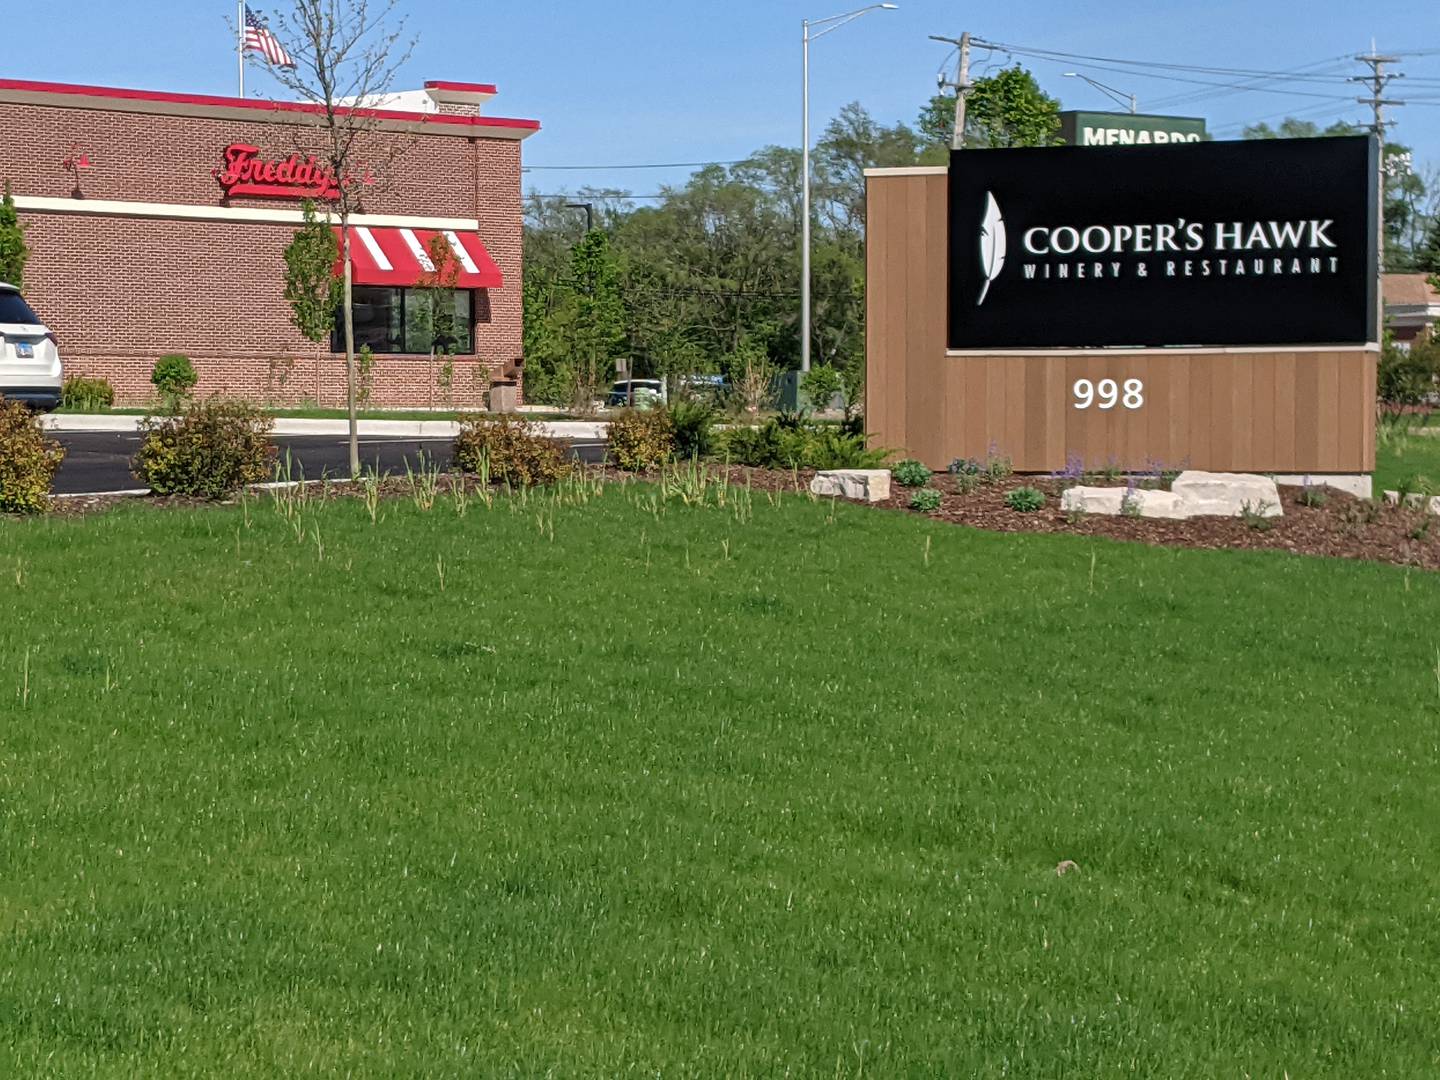 Cooper’s Hawk is located near Freddy’s Frozen Custard & Steakburgers, which opened last November. The fast-casual restaurant chain sells steak burgers that are cooked-to-order, all-beef hot dogs and chicken sandwiches along with freshly churned frozen custard treats.